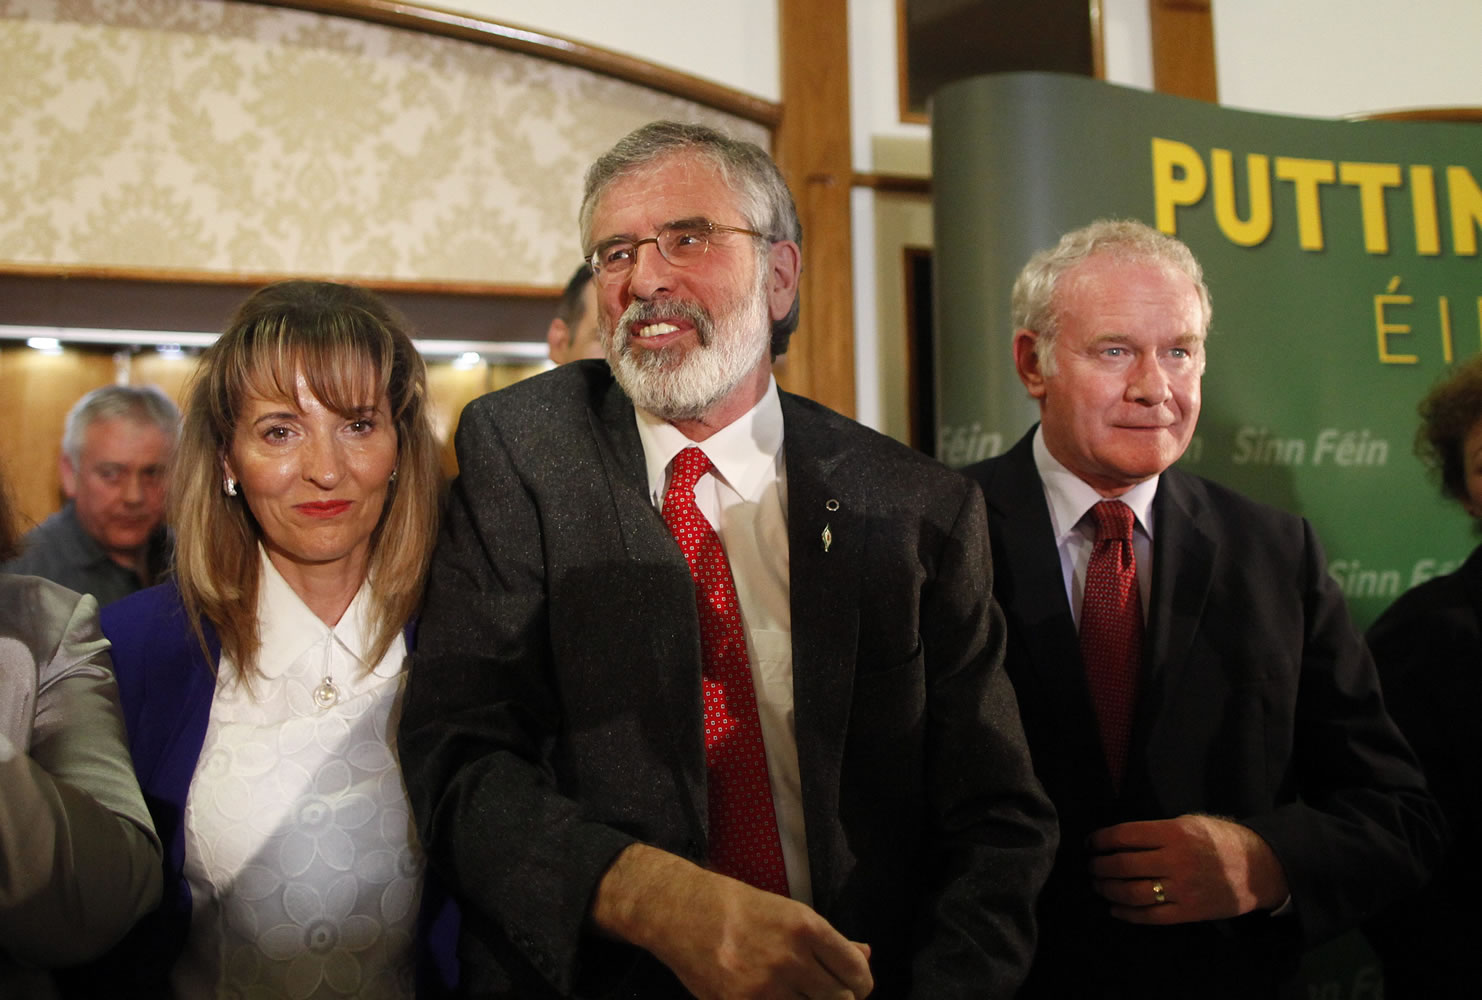 Gerry Adams, Sinn Fein president, was released Sunday without charges.